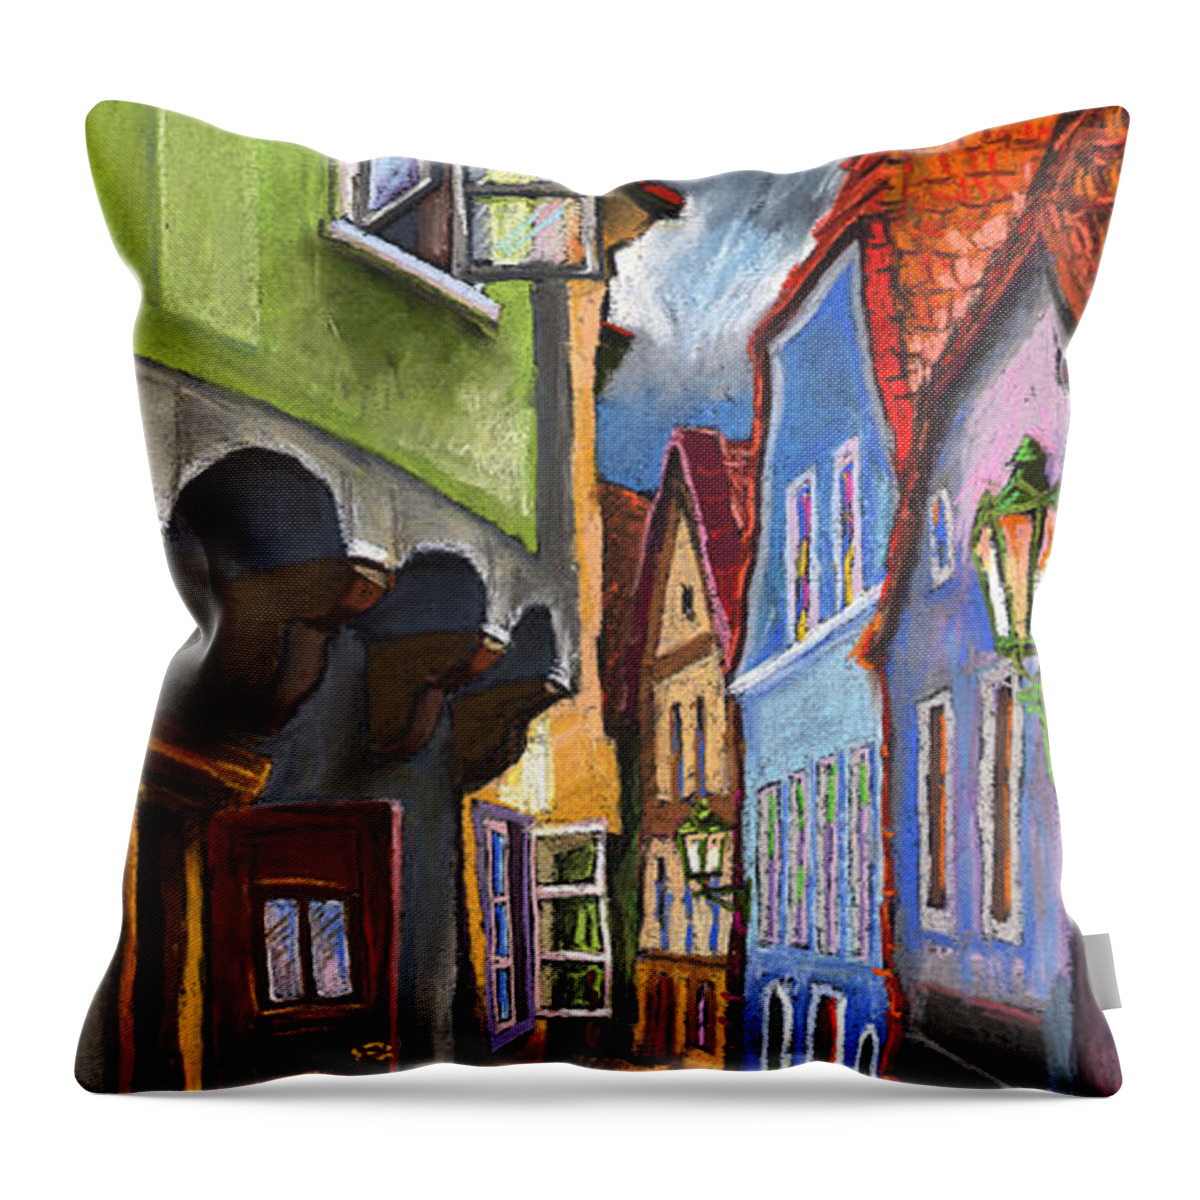 Pastel Throw Pillow featuring the painting Cesky Krumlov Old Street 1 by Yuriy Shevchuk